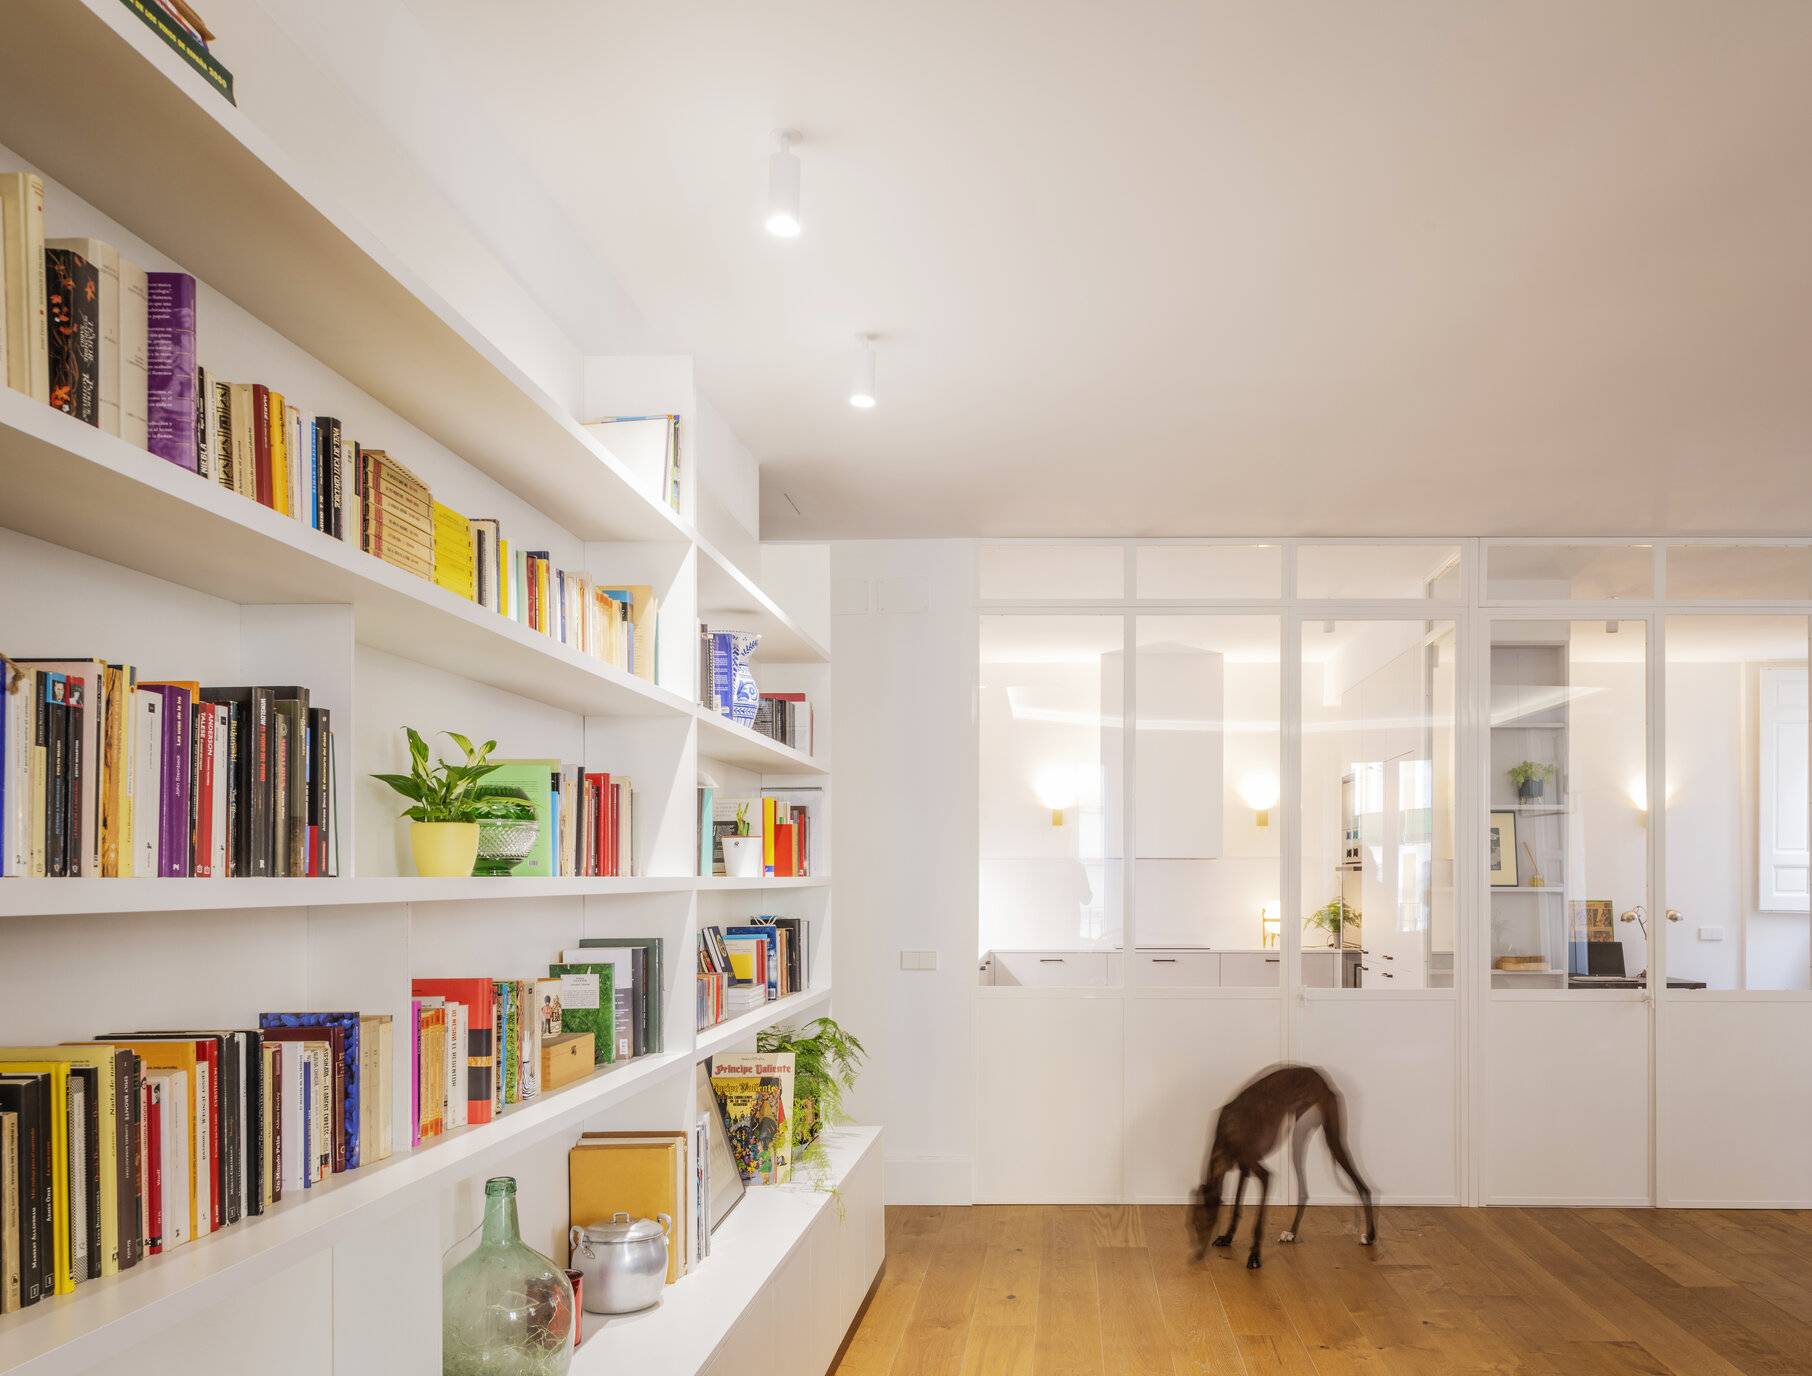 dog walking across wood floors of open living space with wall to wall book shelves